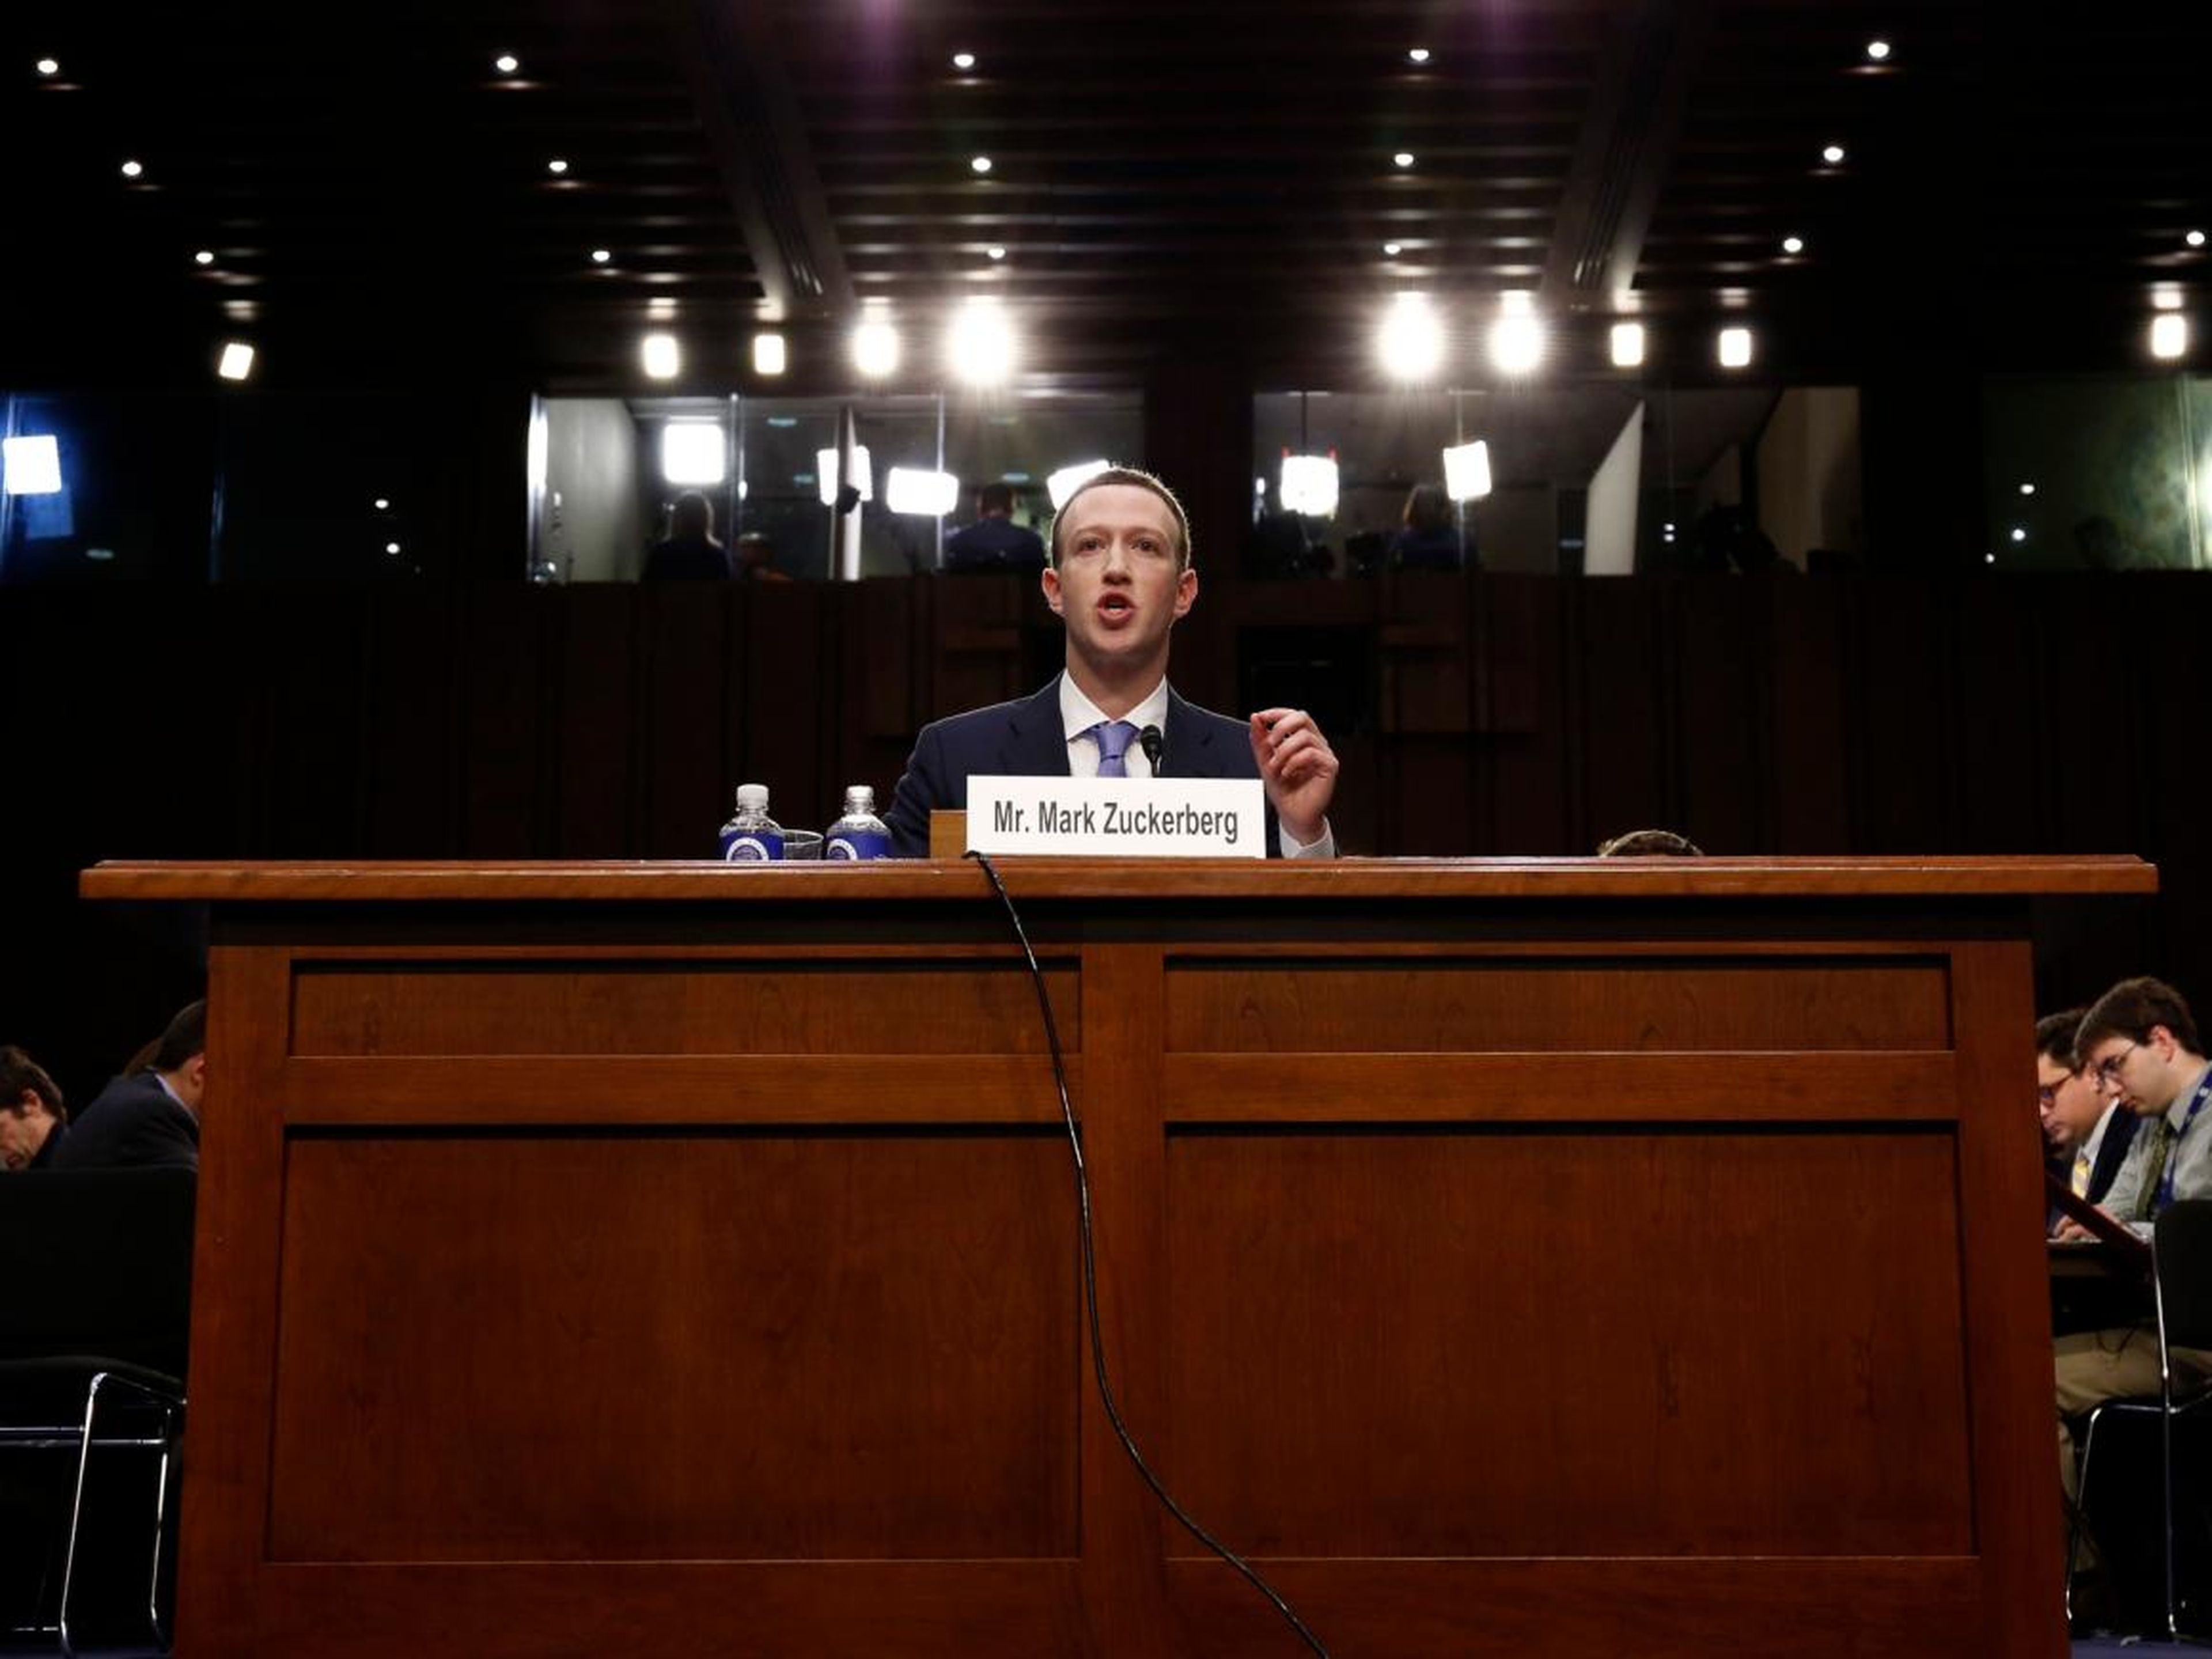 Zuckerberg addressed the scandal in a testimony before Congress in April 2018, saying, "we have made a lot of mistakes in running the company. I think it's pretty much impossible, I believe, to start a company in your dorm room